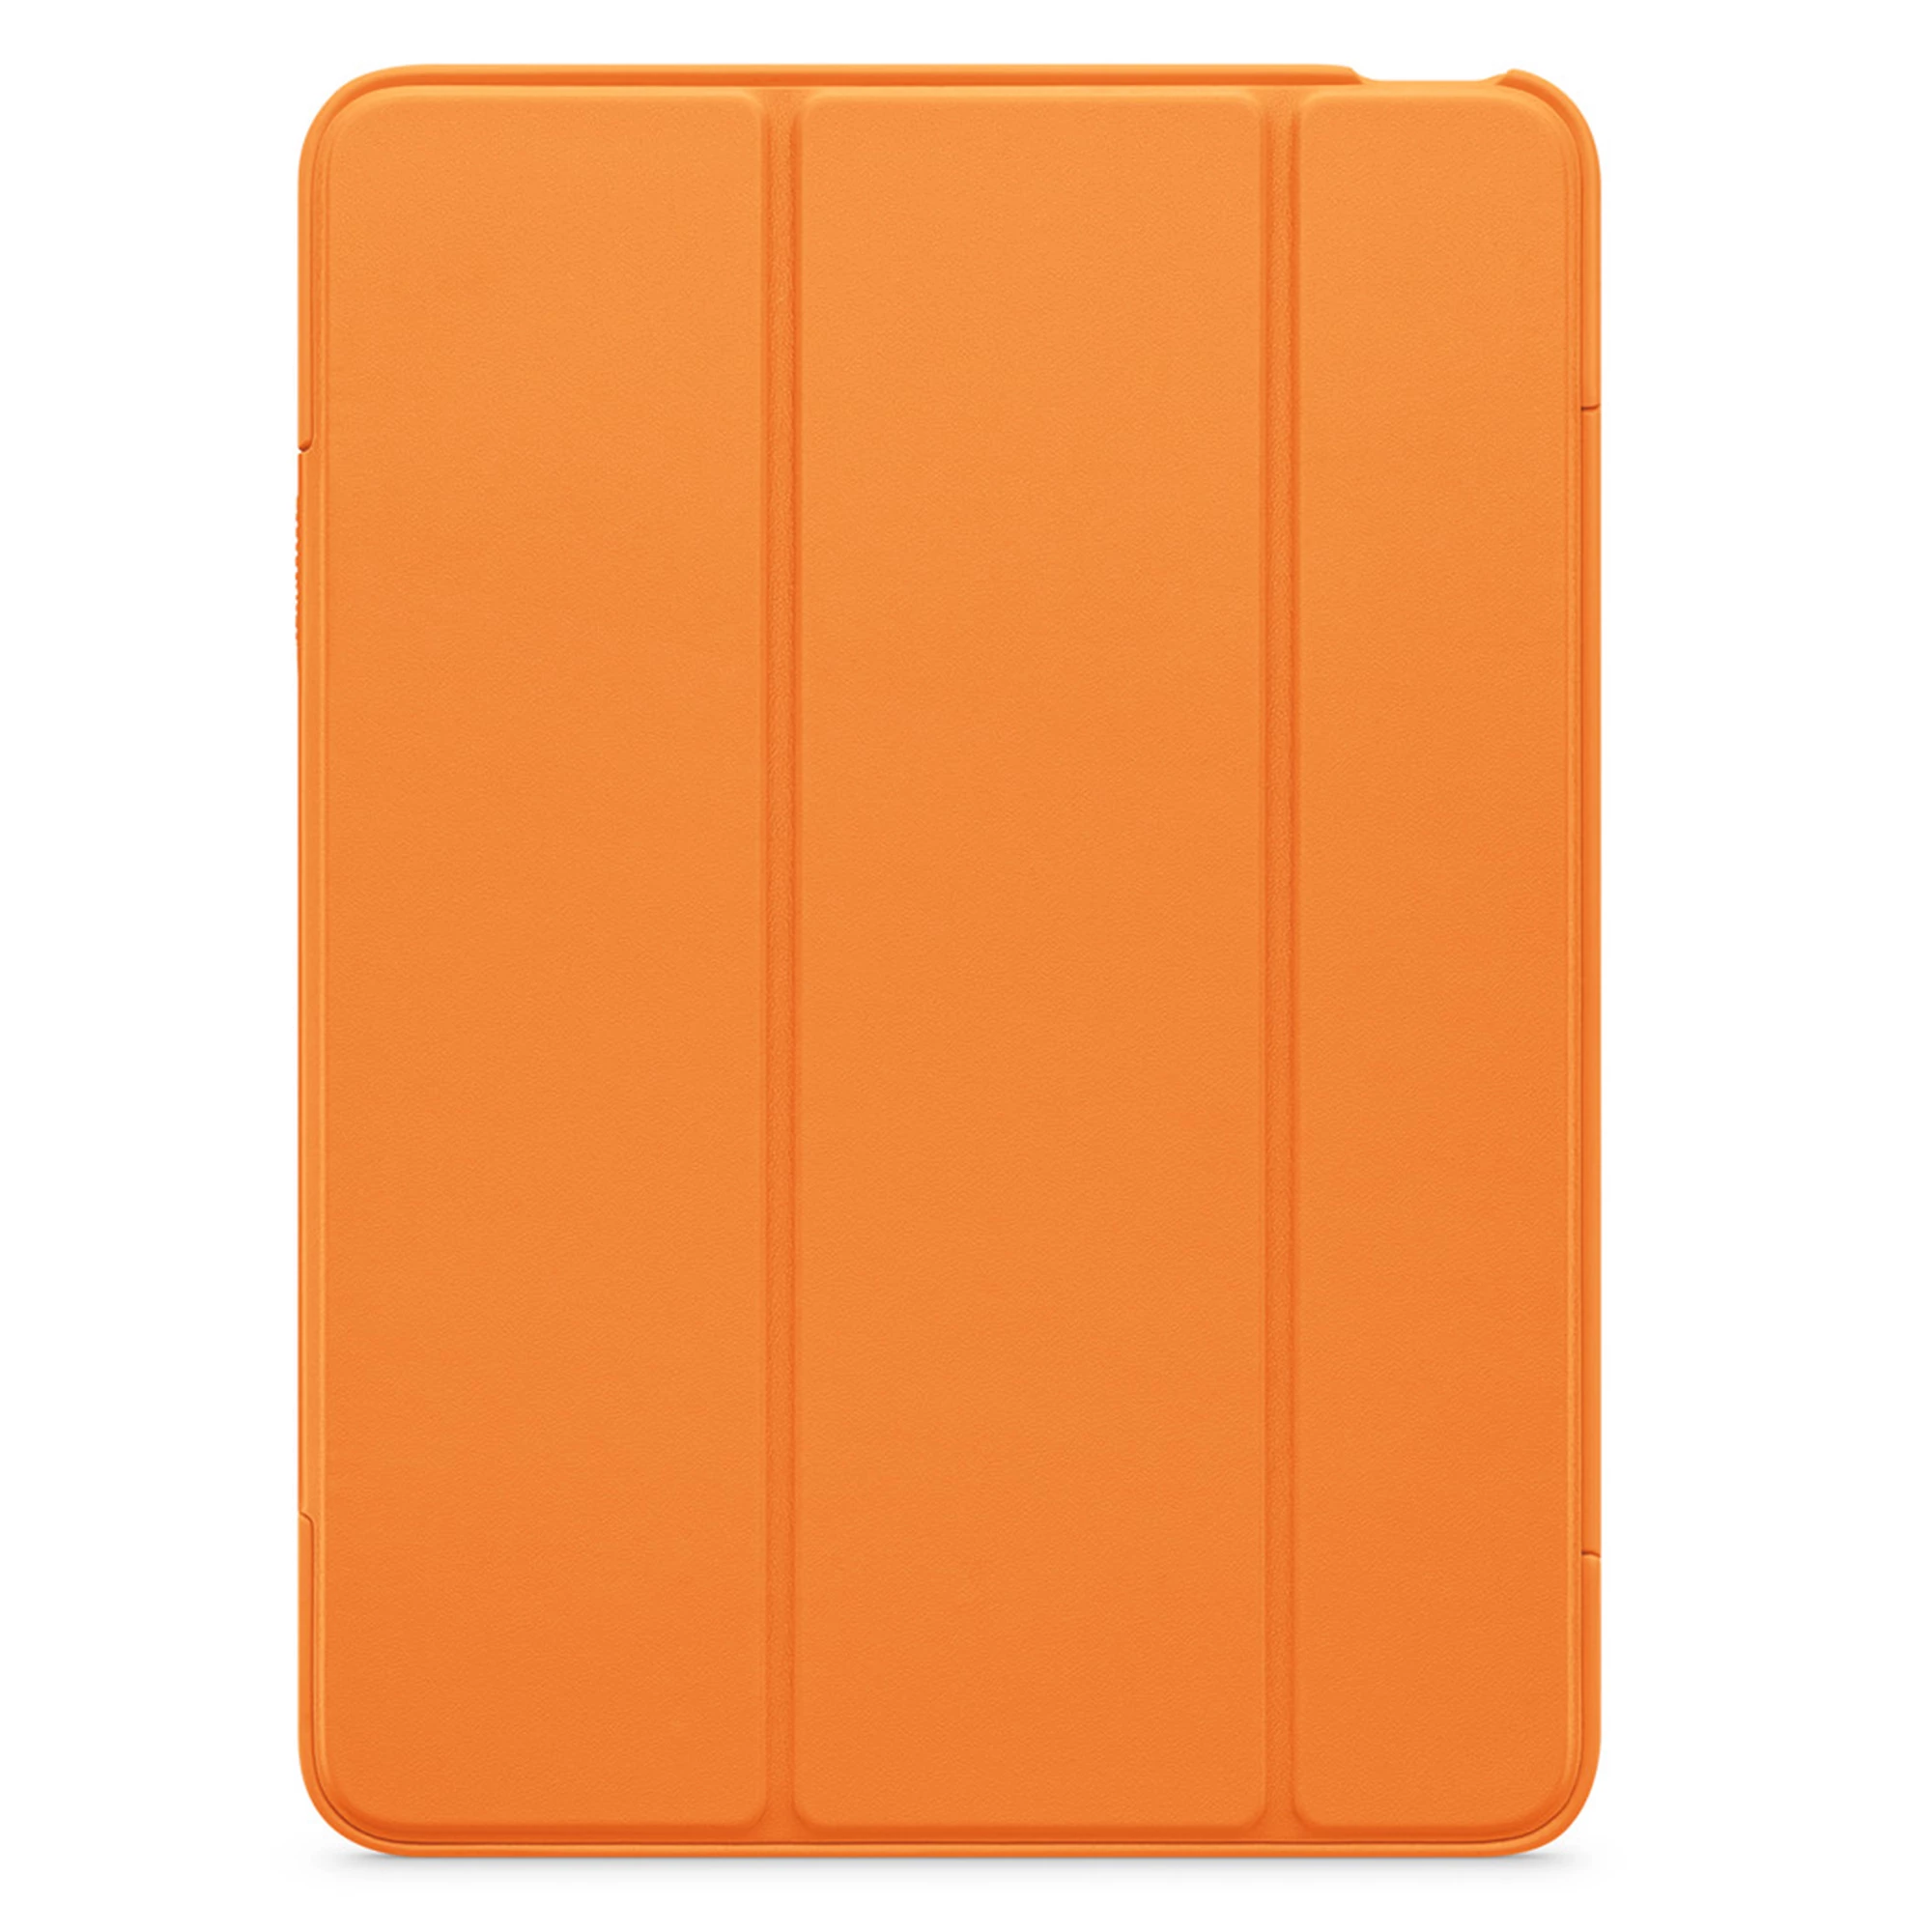 OtterBox Symmetry Series 360 Elite Case for iPad Air (4th and 5th generation) - Orange (HPZB2)